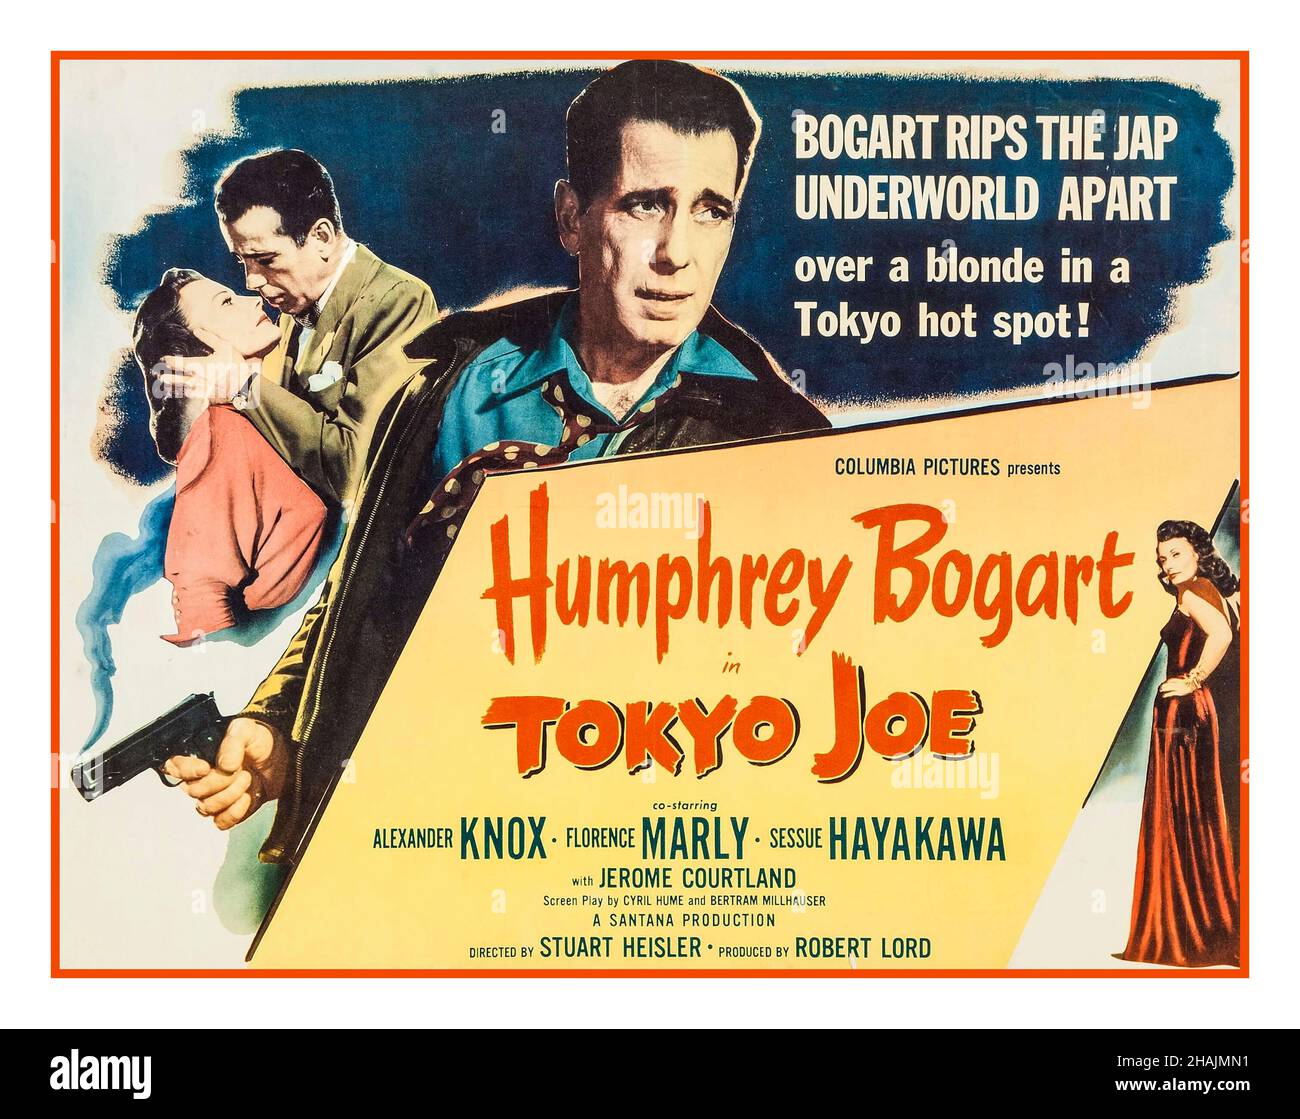 TOKYO JOE BOGART Vintage Movie film poster with Humphrey Bogart starring in TOKYO JOE, starring Humphrey Bogart, Florence Marly, Alexander Knox, Sessue Hayakawa, Jerome Courtland Directed by Stuart Heisler Produced by Robert Lord 1949  Columbia Pictures Stock Photo